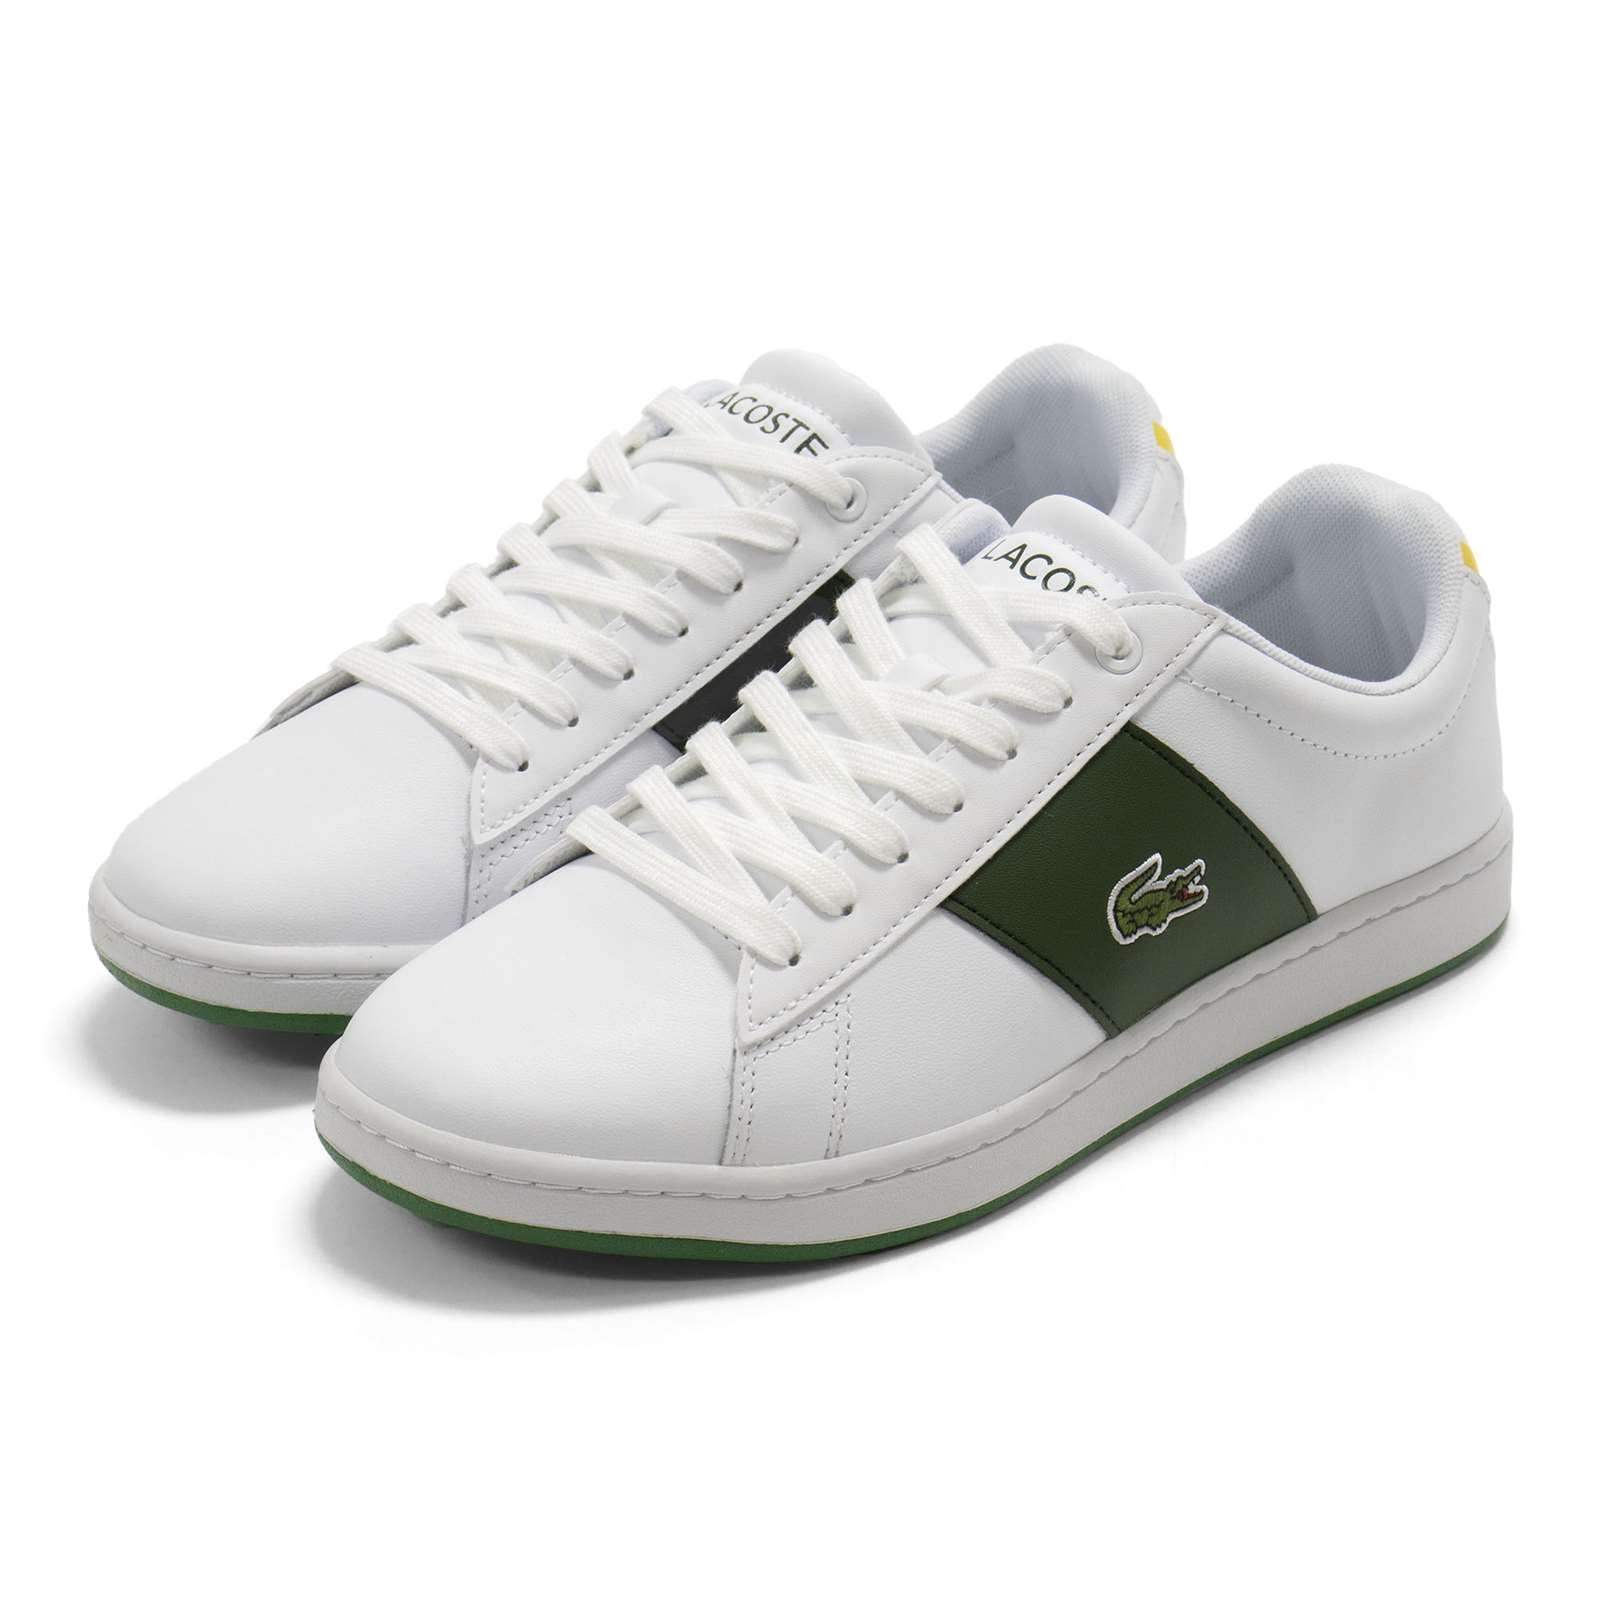 Lacoste Men Carnaby Evo 0722 3 Sma Leather Fashion Sneakers